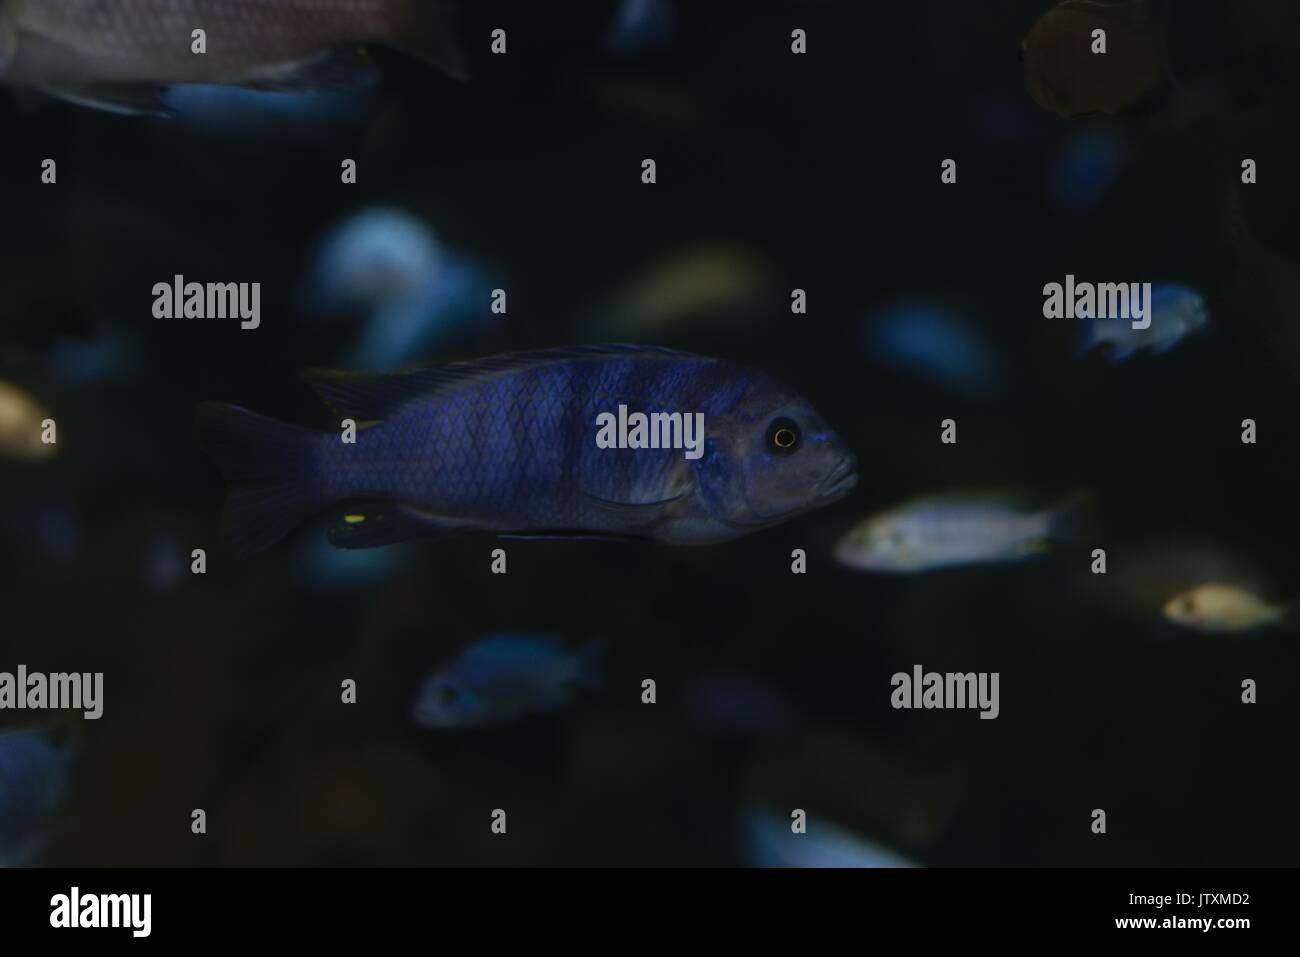 A small stripped fish that is swimming around with a dark blurred background with other fish around. Stock Photo